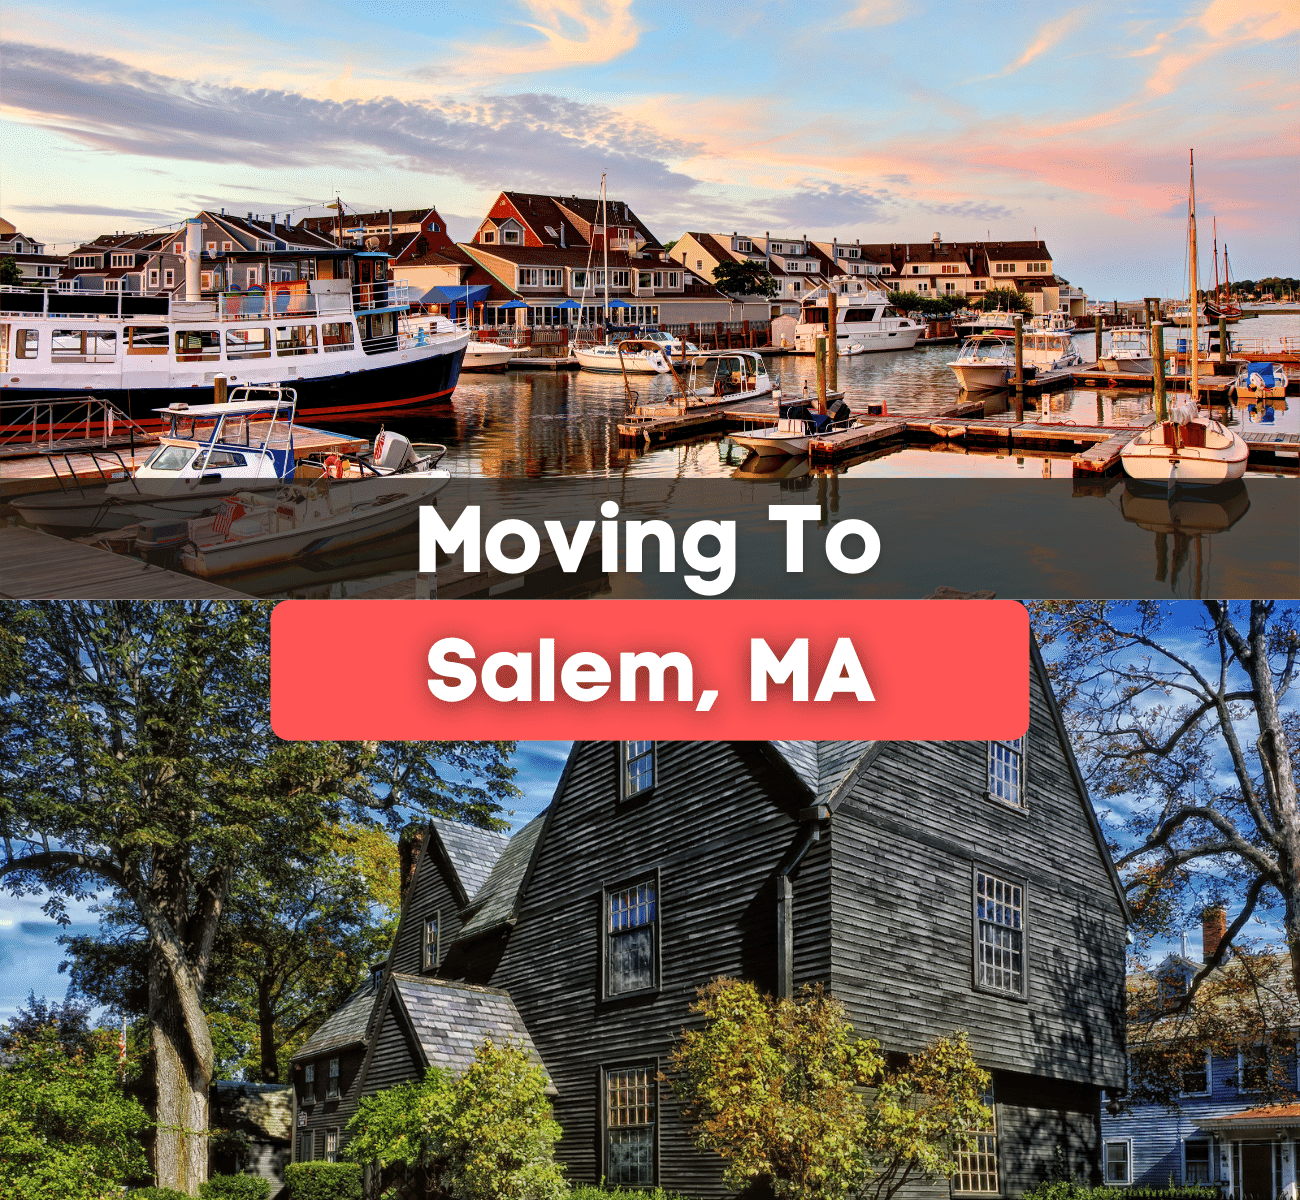 moving to Salem, MA graphic - house of seven gables and waterfront in Salem with boats 